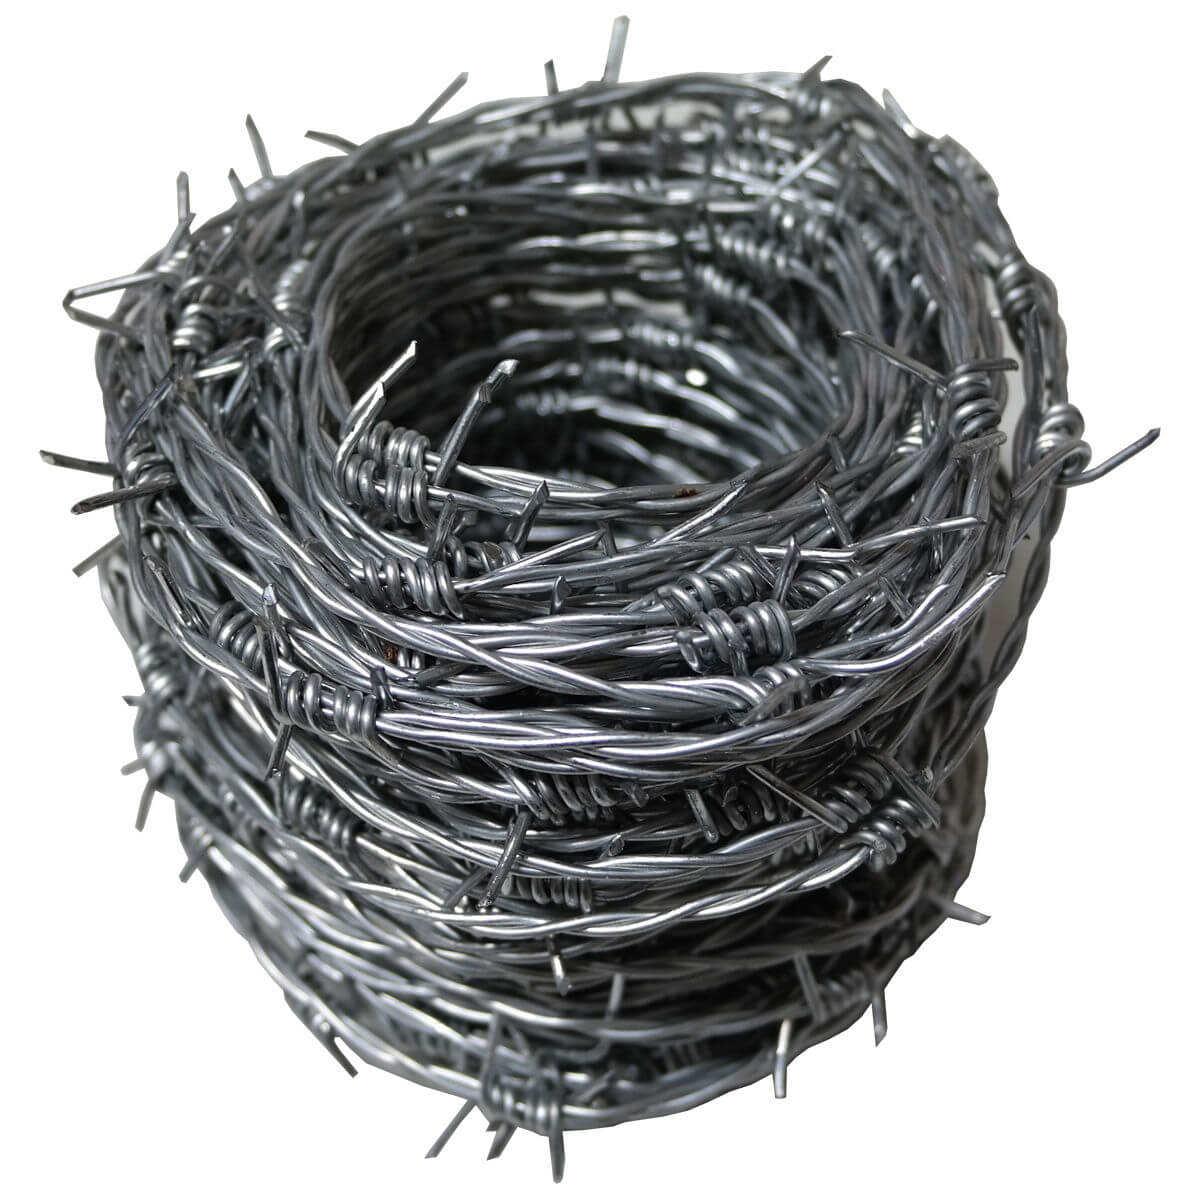 Hiking and camping safety: Barbed wire as a potential hazard